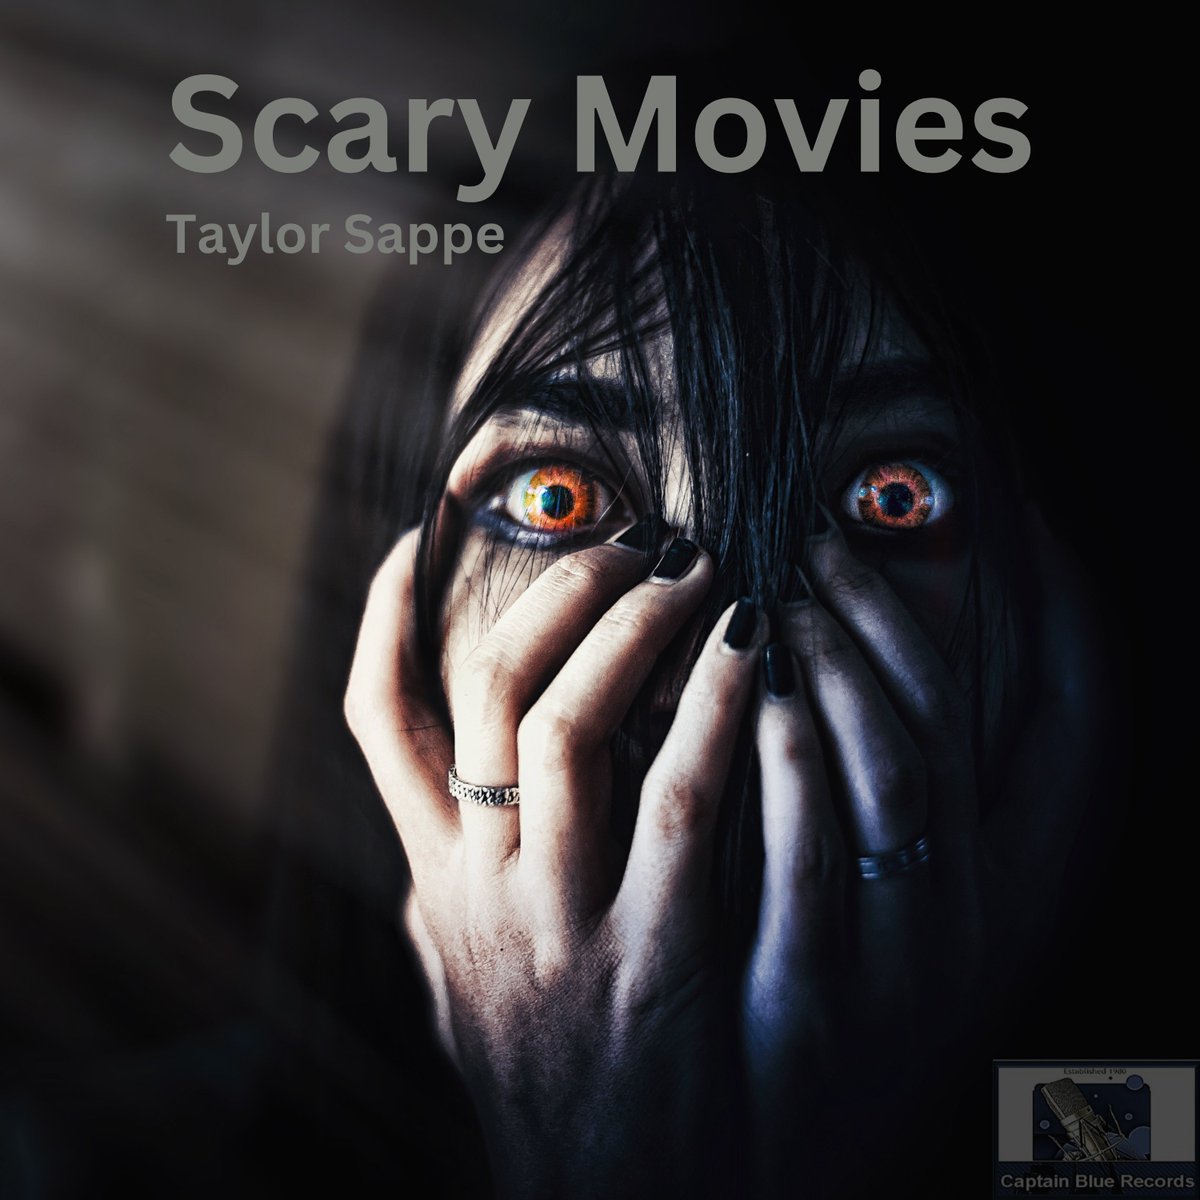 New electronic music release 'Scary Movies' by our subsidiary label Captain Blue Records
bit.ly/3vuIHQ2

@KMaster49620335 @CharmedToATee @terri_69_ @rogeronmusic @CarolineLundSF @EdmDutch @RashadaWrites @Tom__Coleman